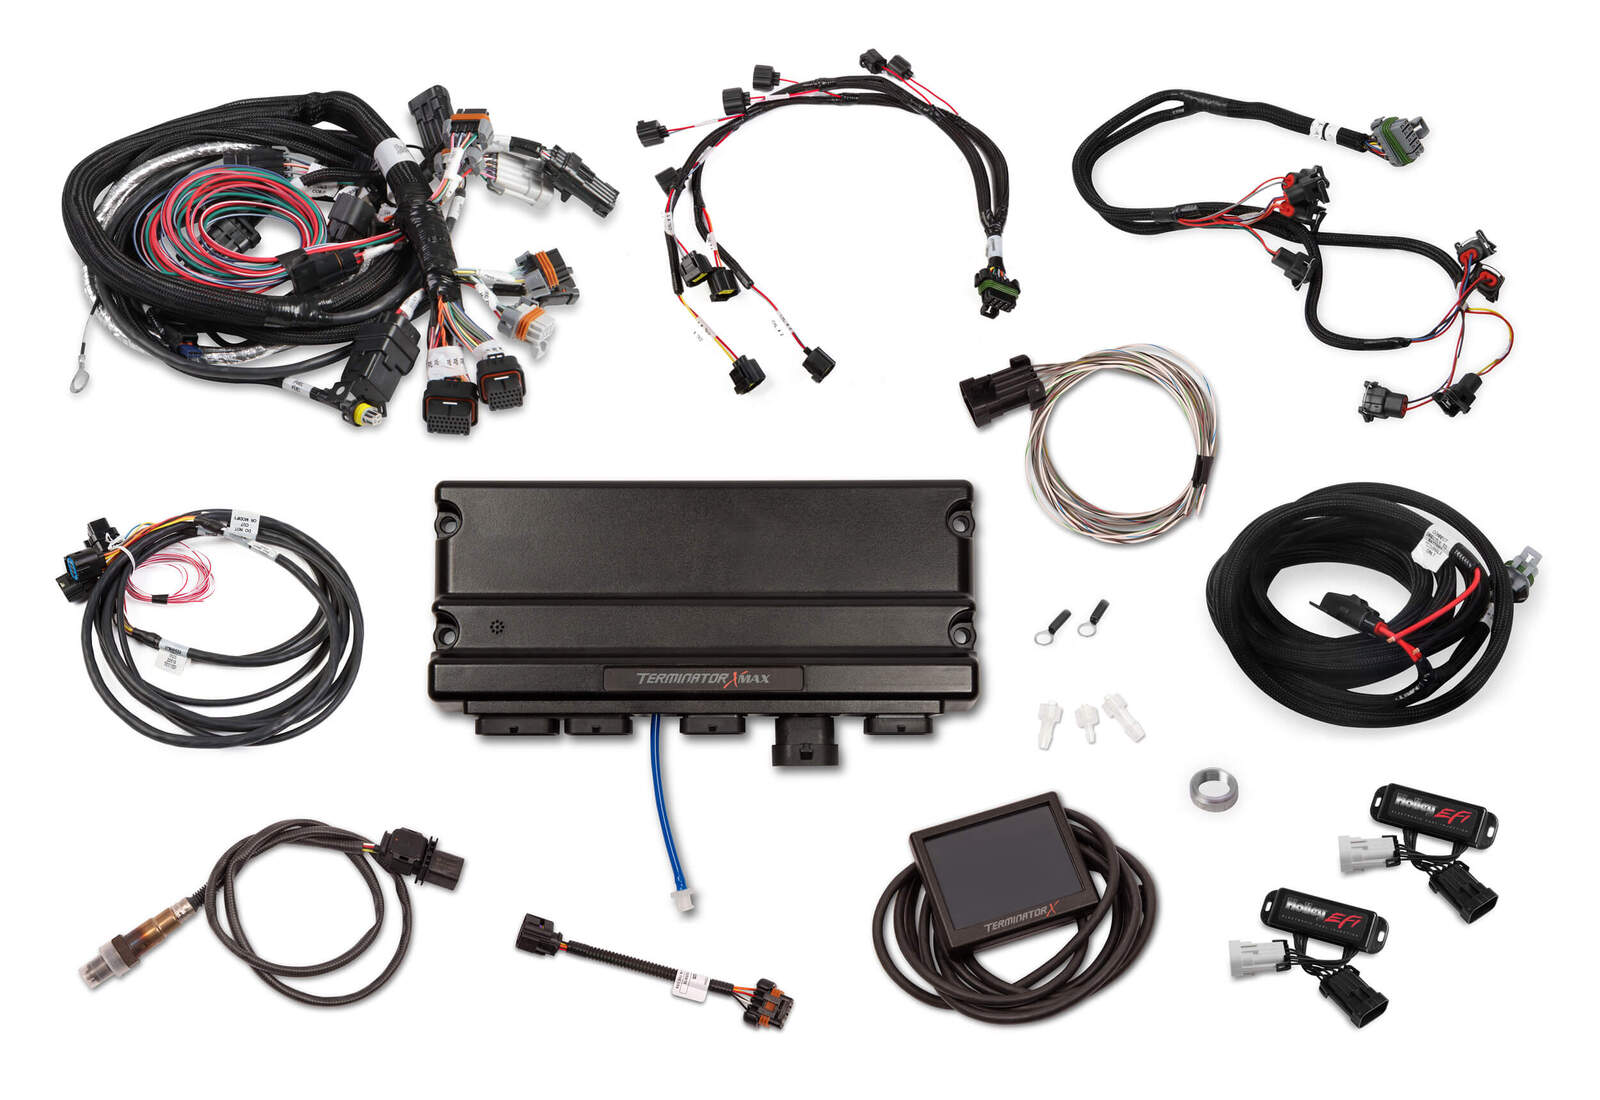 Holley EFI Engine Management System, 2006-12 Hemi Gen III, Drive by Wire, Non-VVT Transmission Controller, EV1 Injectors, Kits